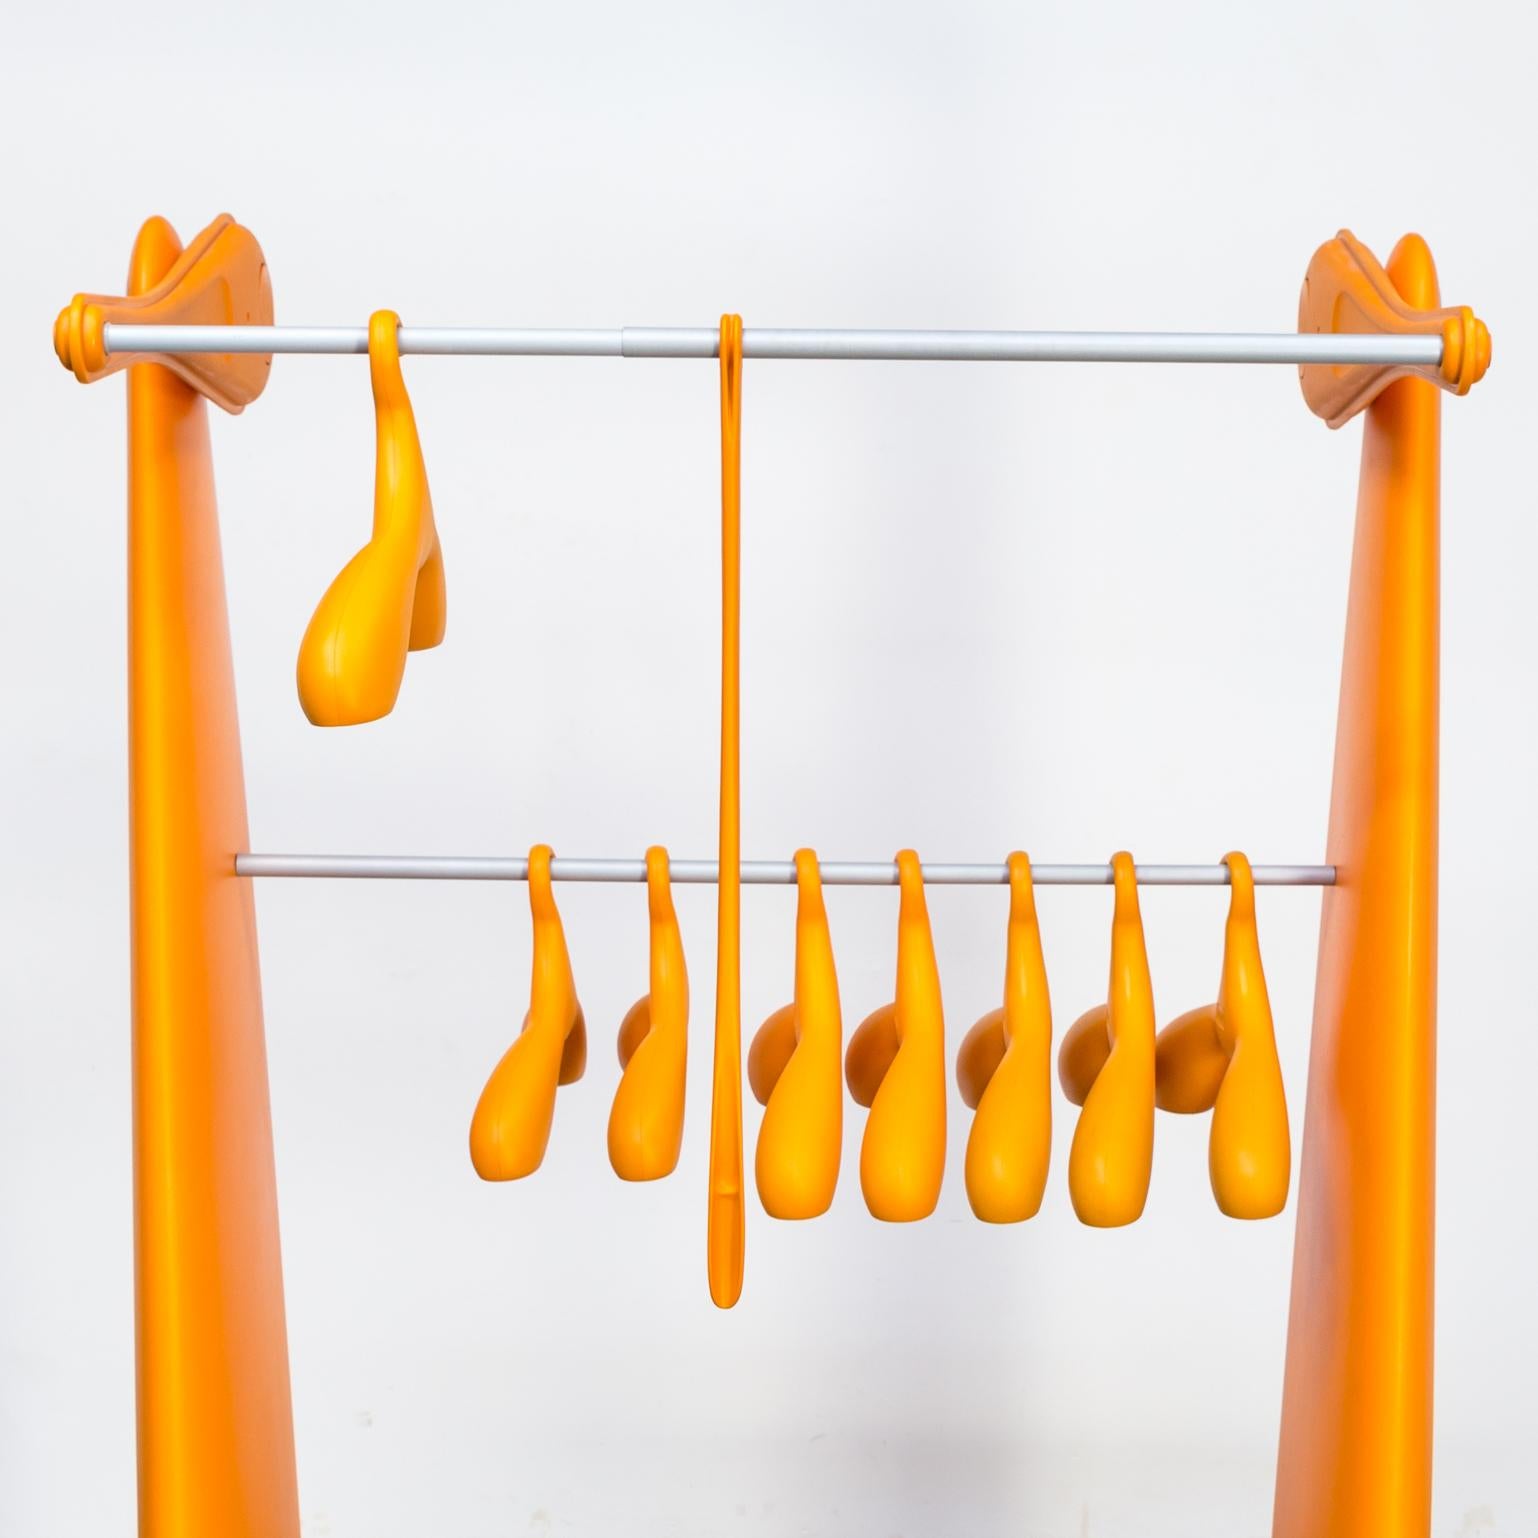 E. Terragni Coat Stand ‘Atelier’ & Servetto Lift and Dino Clothes Hangers im Angebot 4